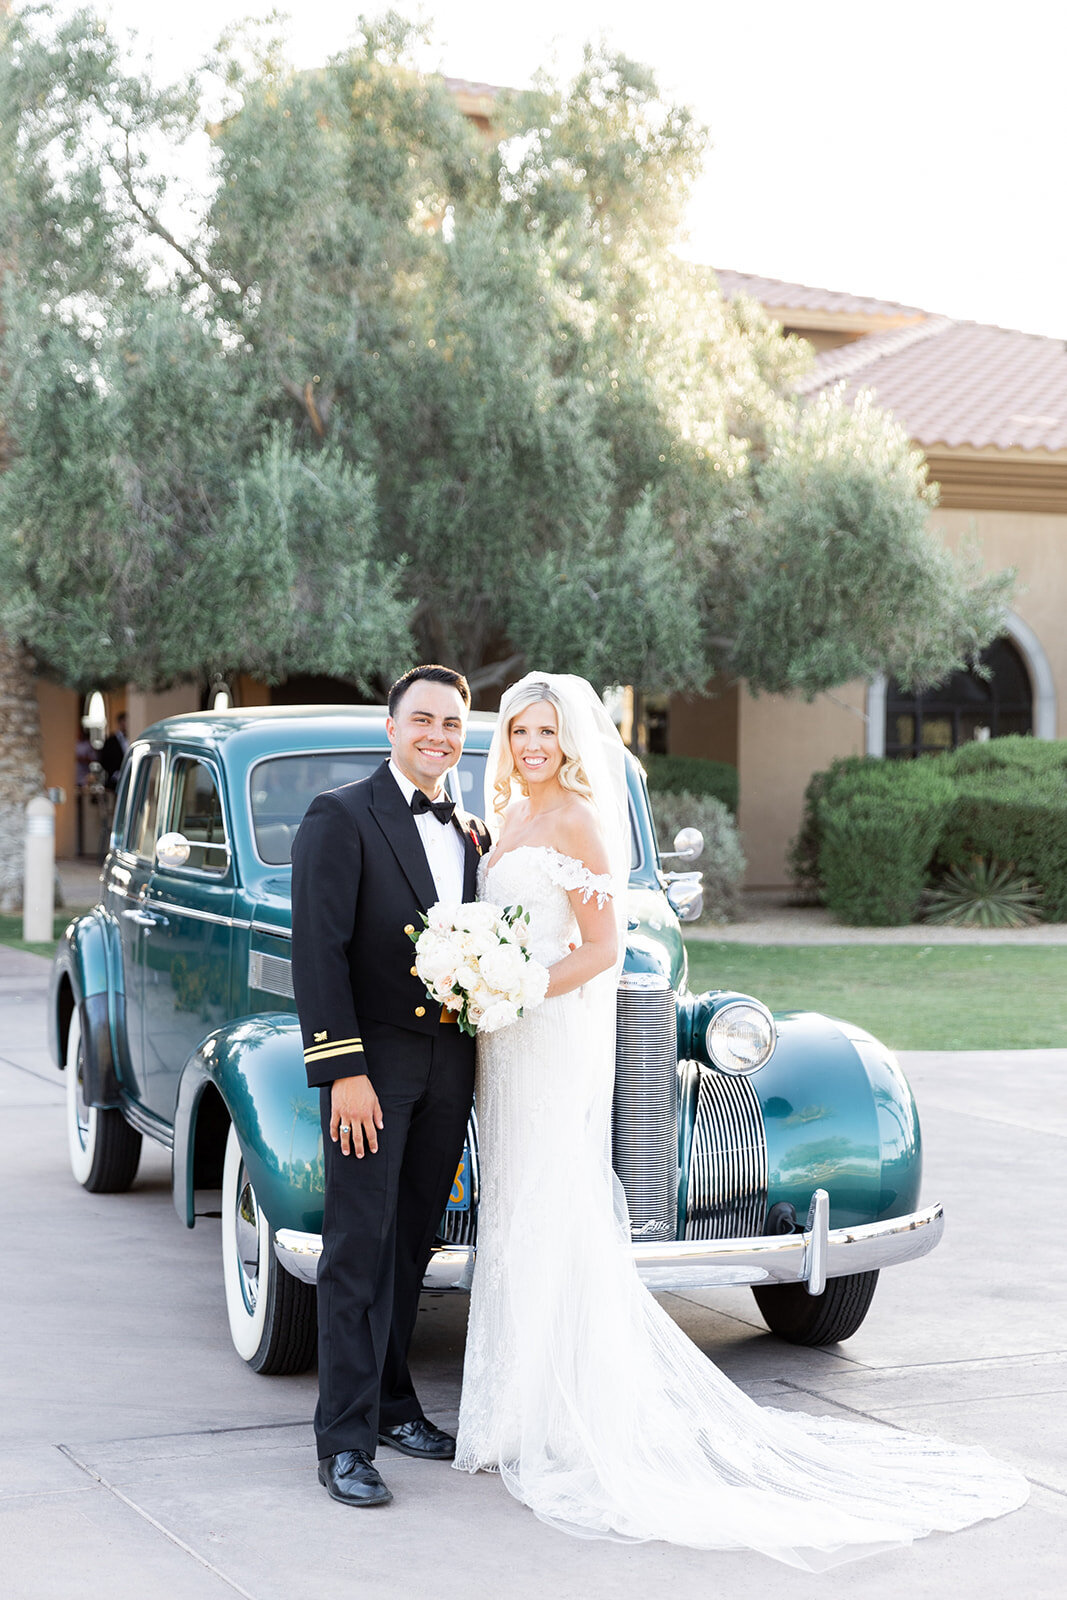 Karlie Colleen Photography - Holly & Ronnie Wedding - Seville Country Club - Gilbert Arizona-678